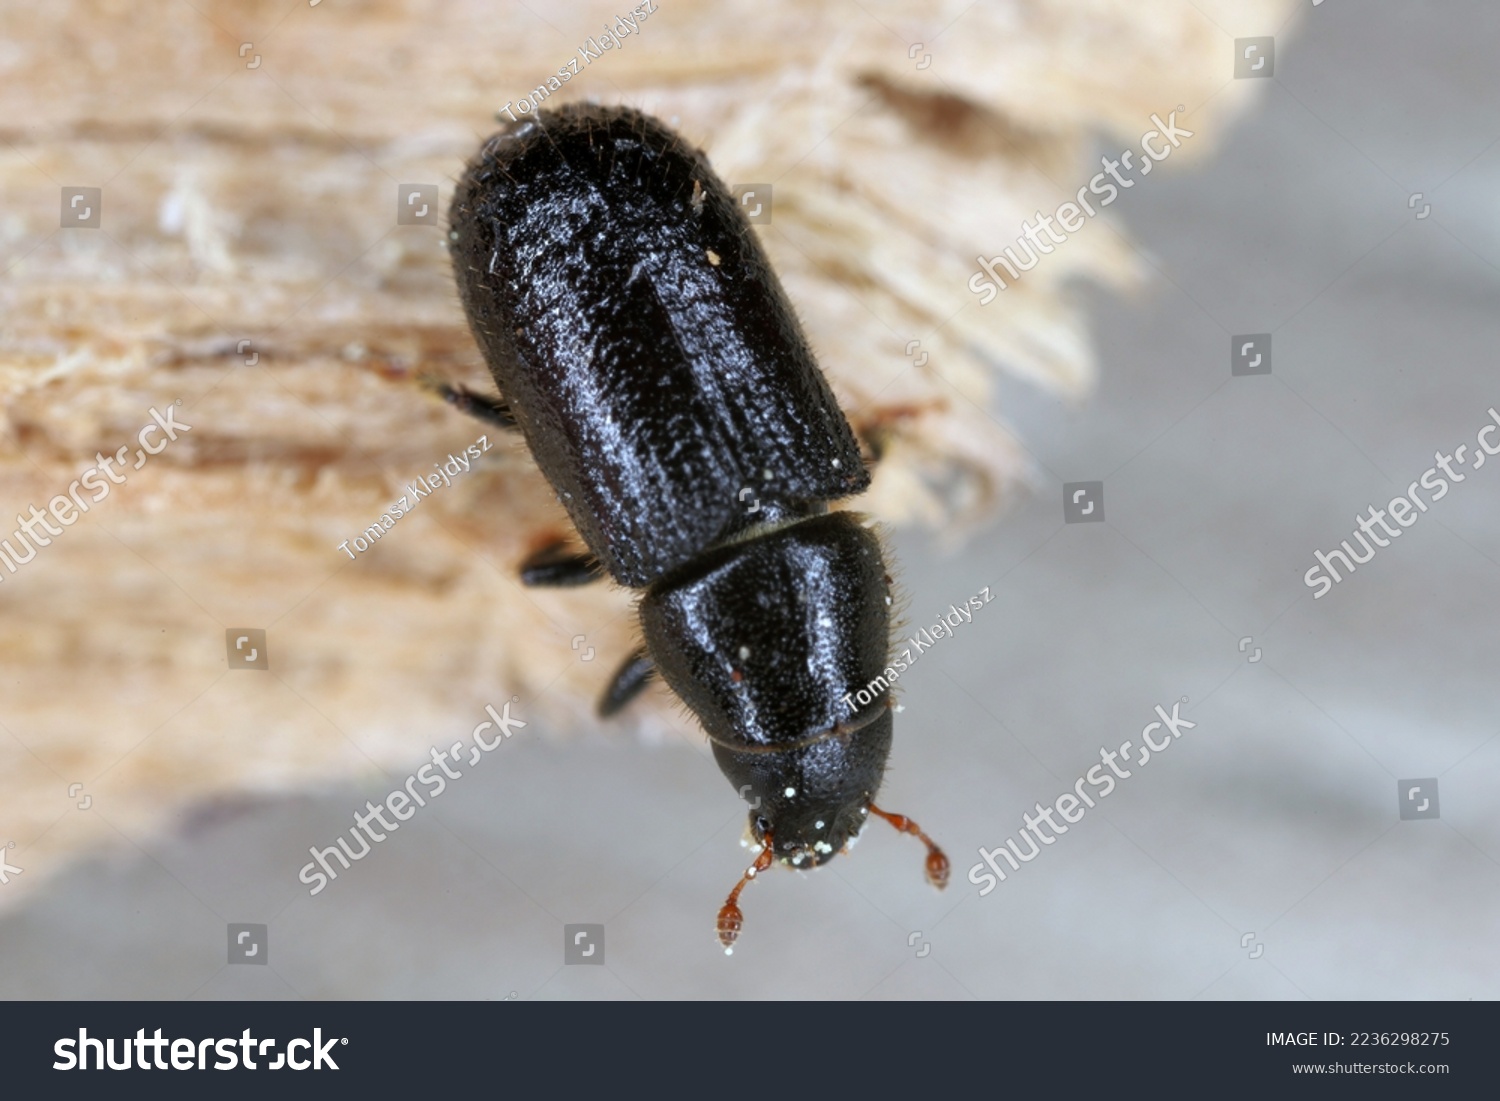 Lesser pine shoot beetle, Tomicus minor. The bark beetle, Scolytinae, Scolytidae a pest in coniferous forests. #2236298275